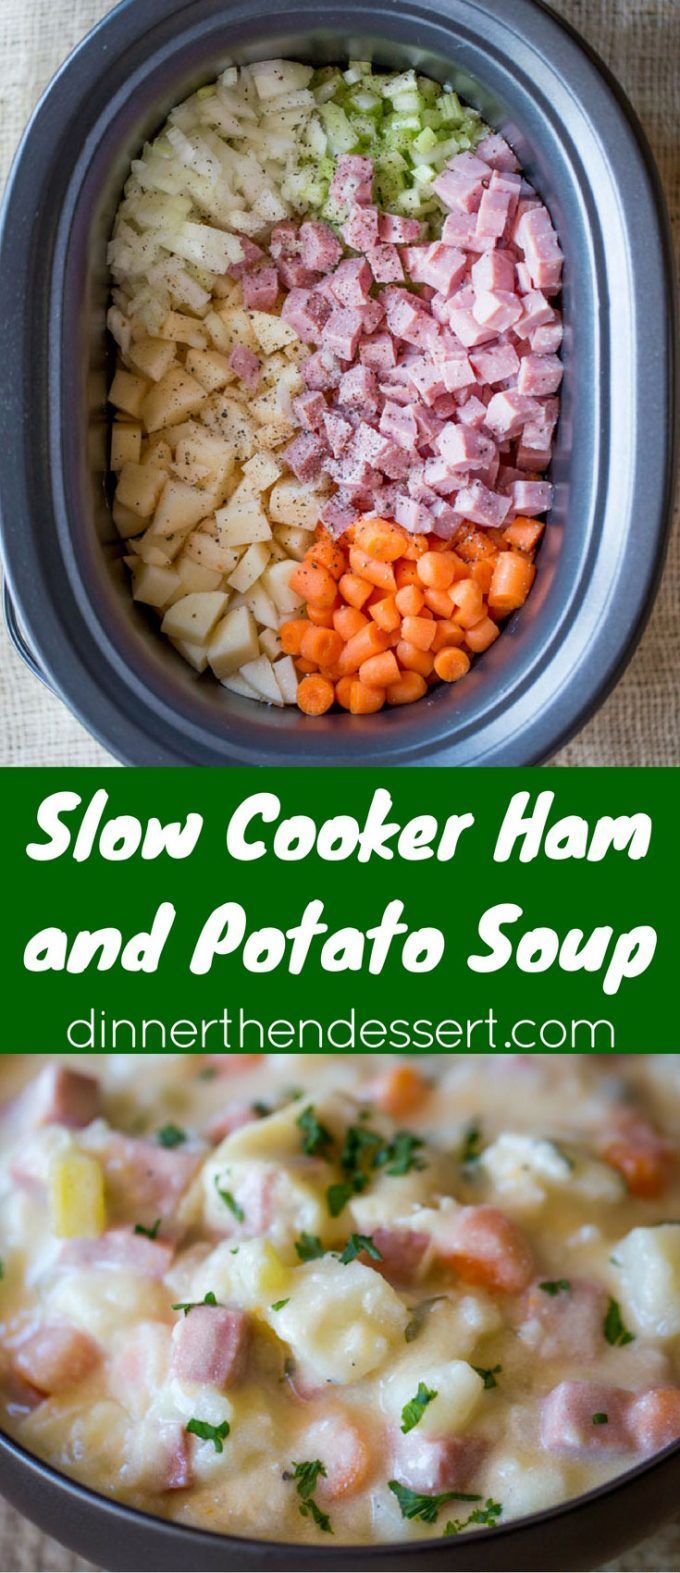 Slow Cooker Ham and Potato Soup thats creamy, full of vegetables and chunks o